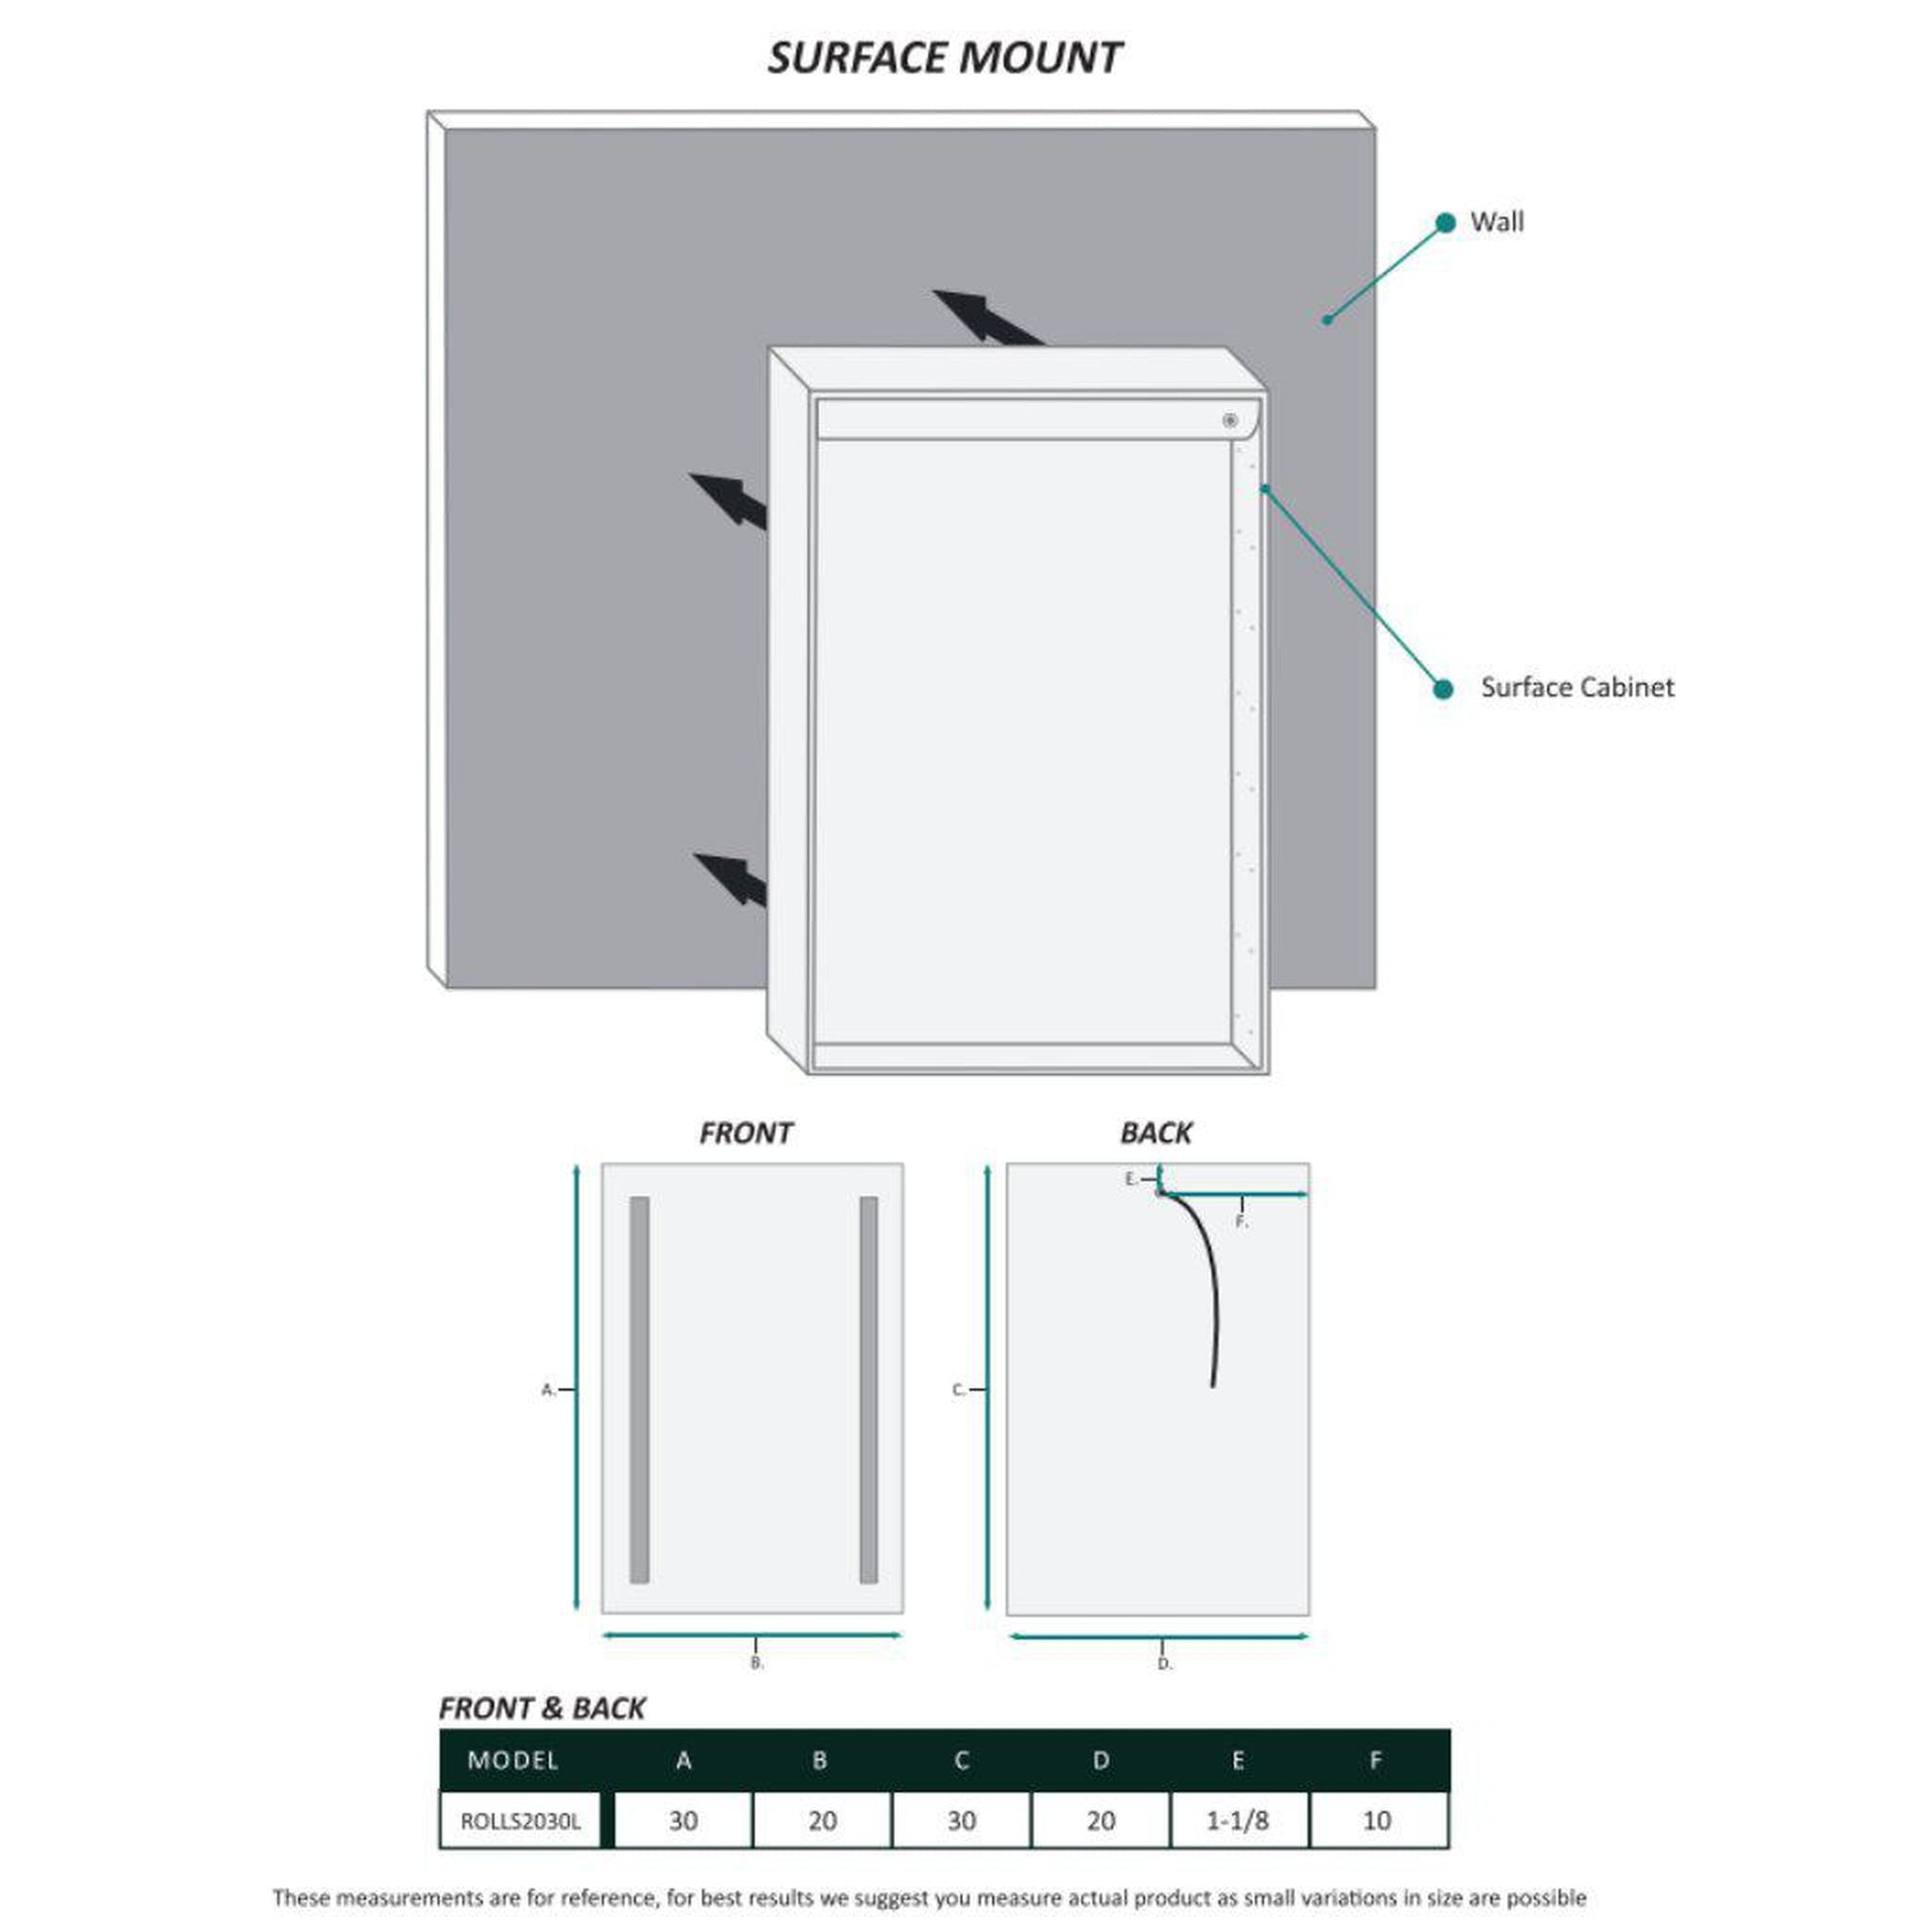 Krugg Reflections Rolls 20" x 30" Single Left Opening Rectangular Recessed/Surface-Mount Illuminated Silver Backed LED Medicine Cabinet Mirror With Built-in Defogger, Dimmer and Electrical Outlet